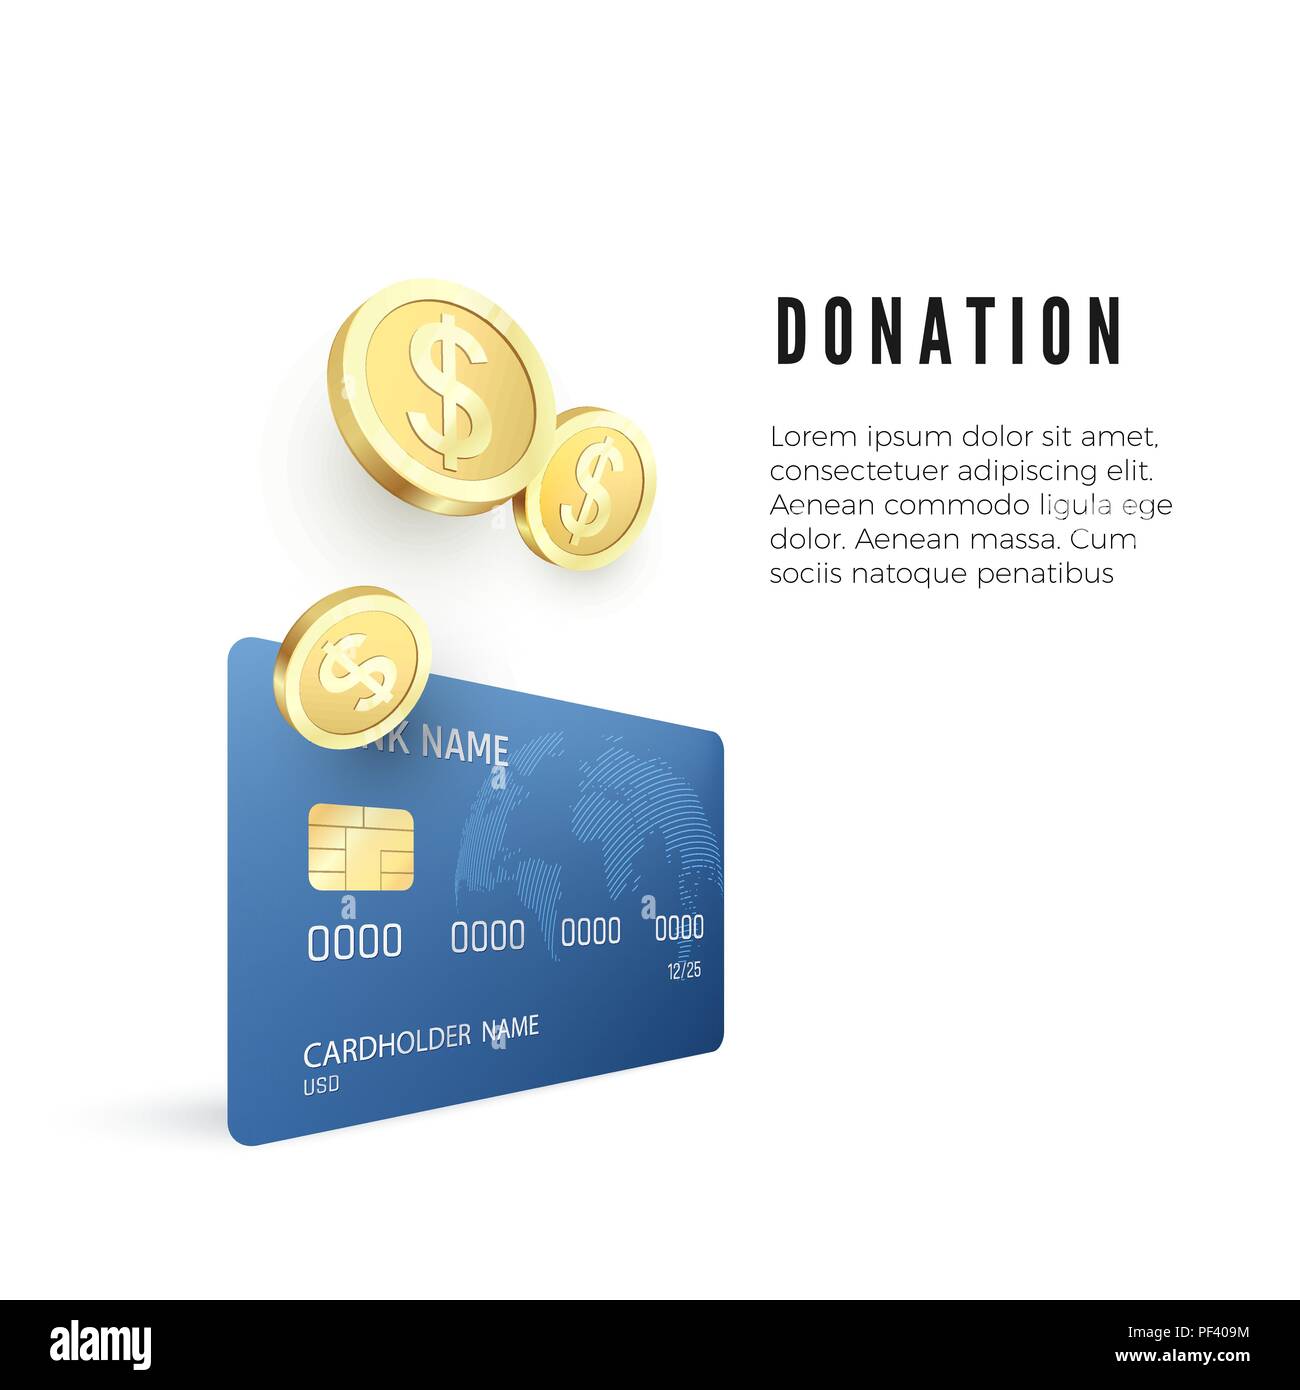 Donation concept. Golden coin collect on credit card. Vector illustration isolated on white background Stock Vector